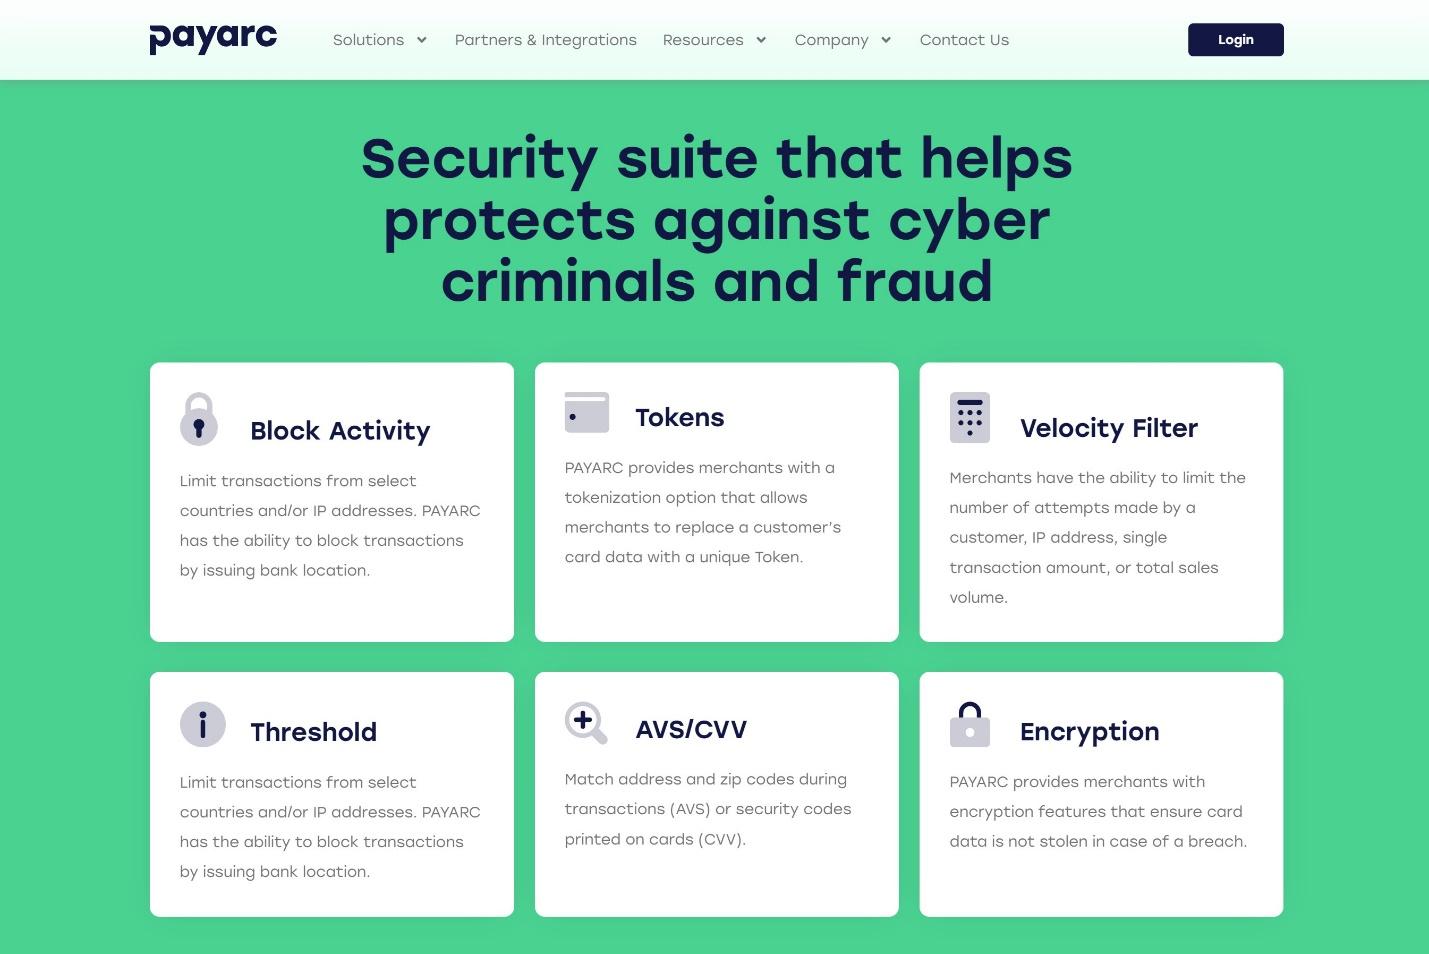 PayArc suite of security tools